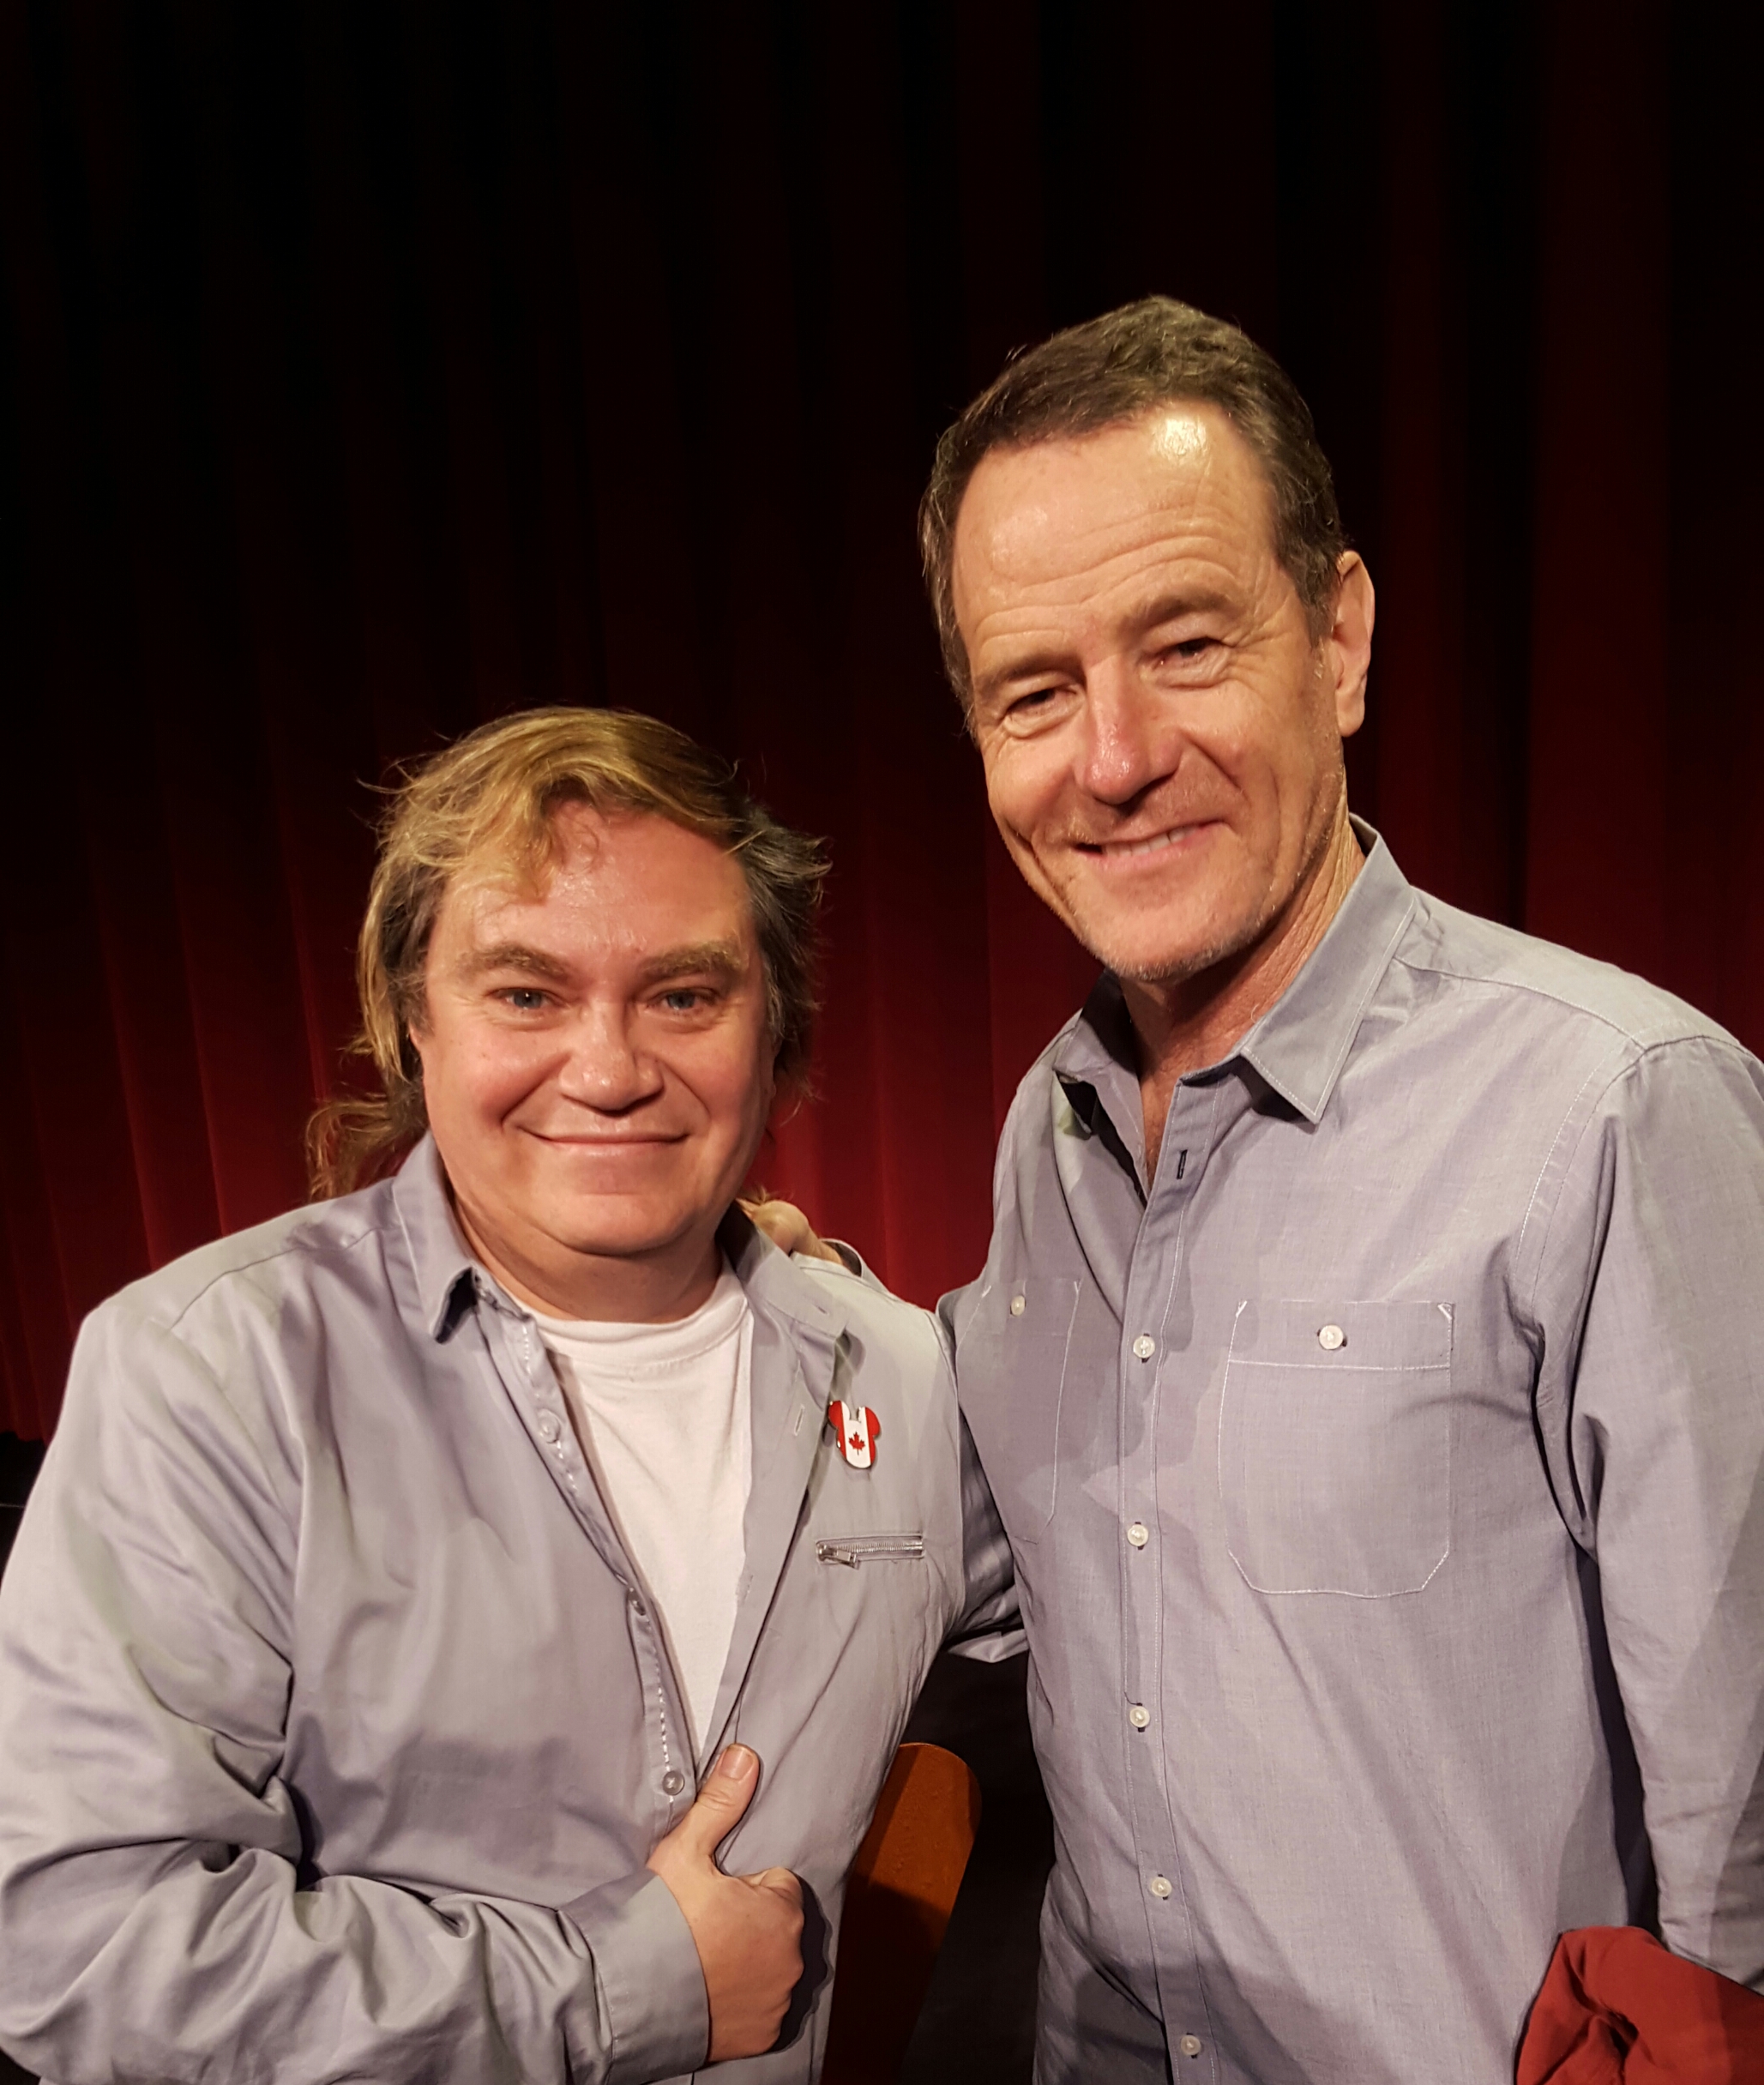 Pierre Patrick & Bryan Cranston an Multiple Emmy and Golden Globe Winner. Motion Picture Academy Event for his film TRUMBO.